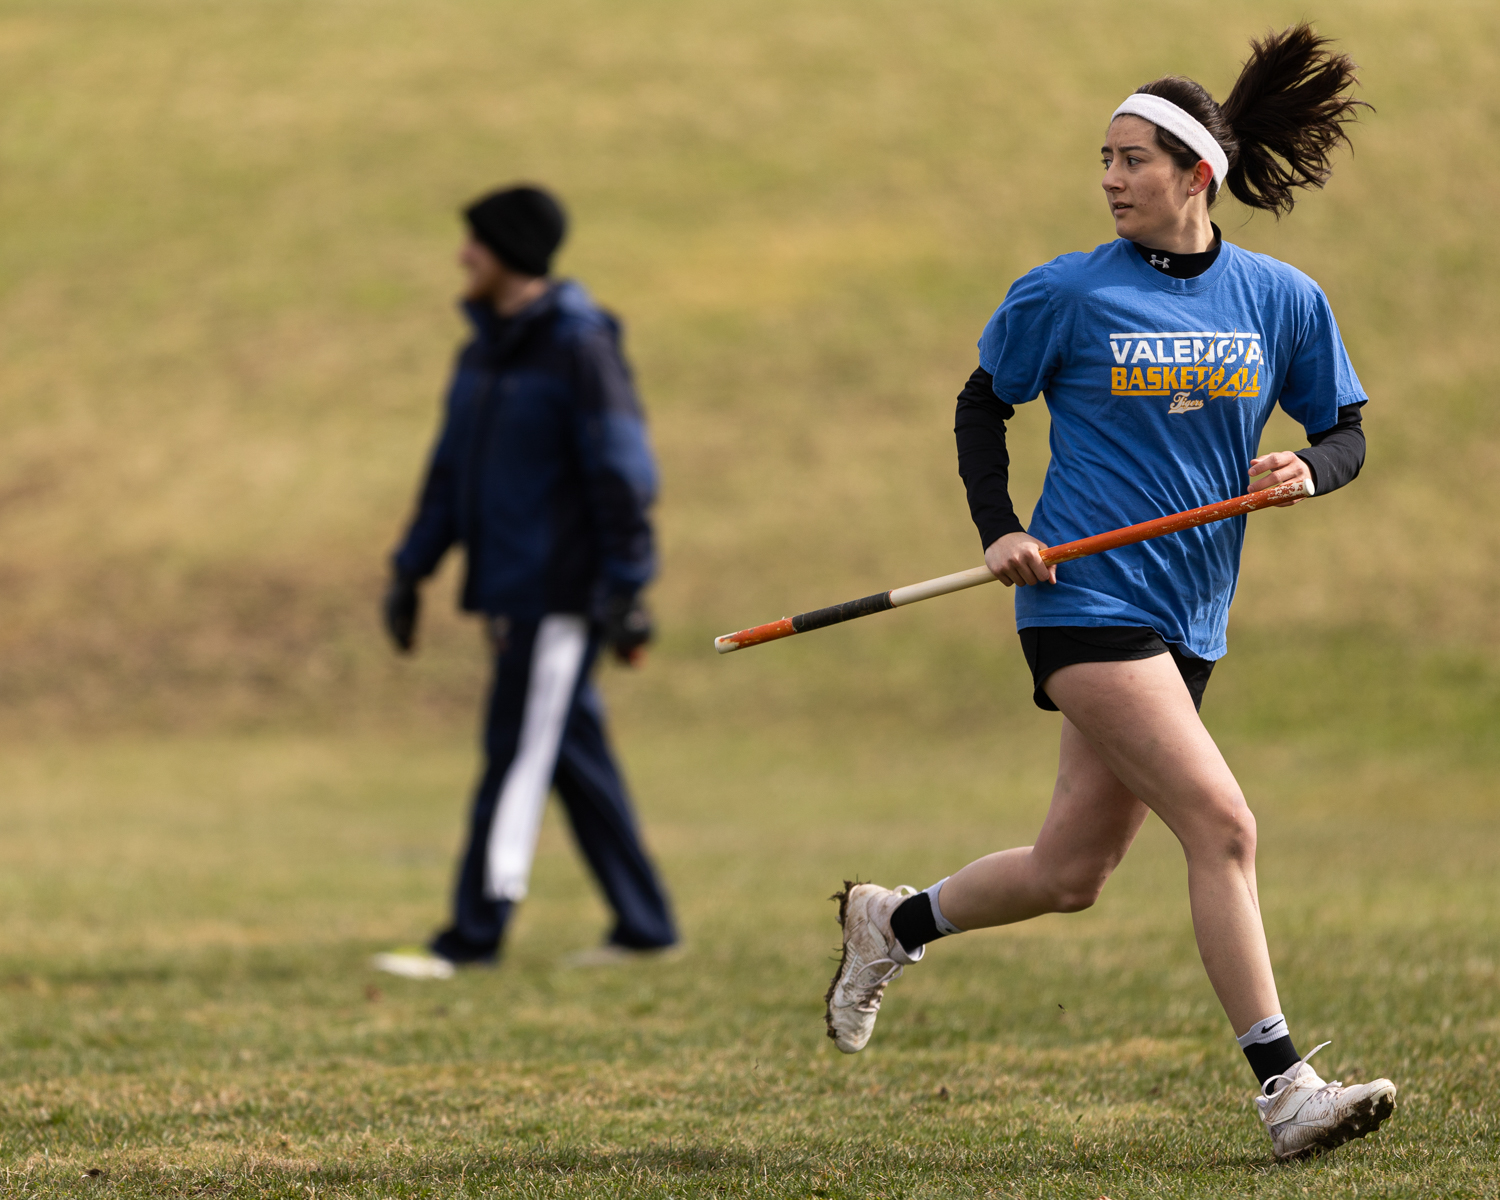 A Quidditch player at the King's Cup on Shyhall Field on April 2, 2022.